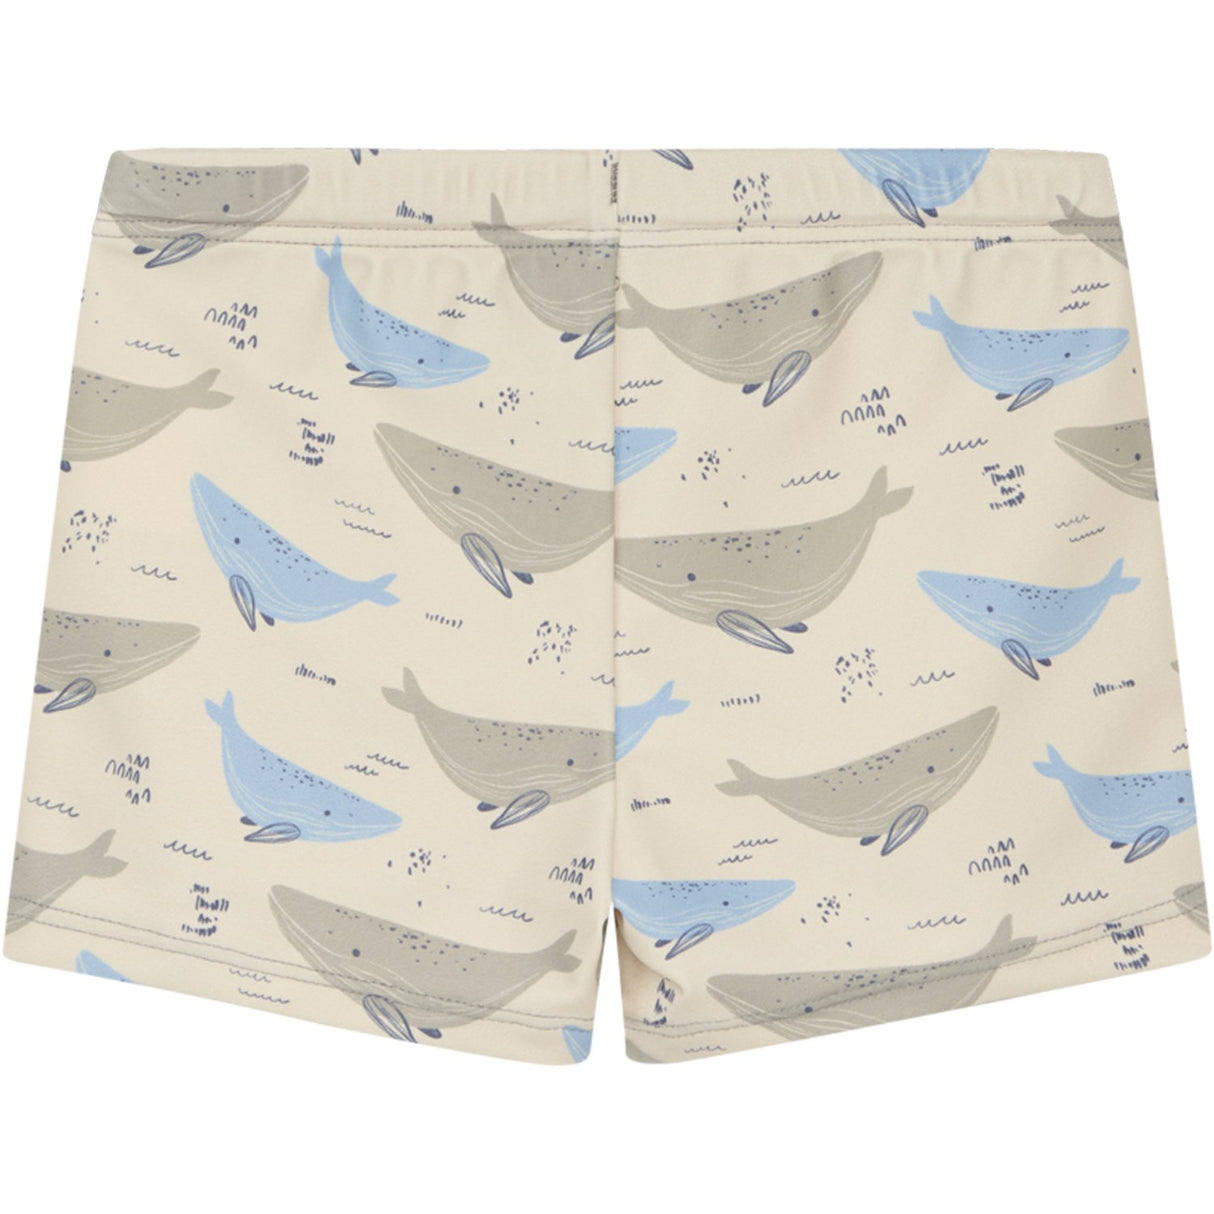 Hust & Claire French oak Haki Swimming Trunks 2